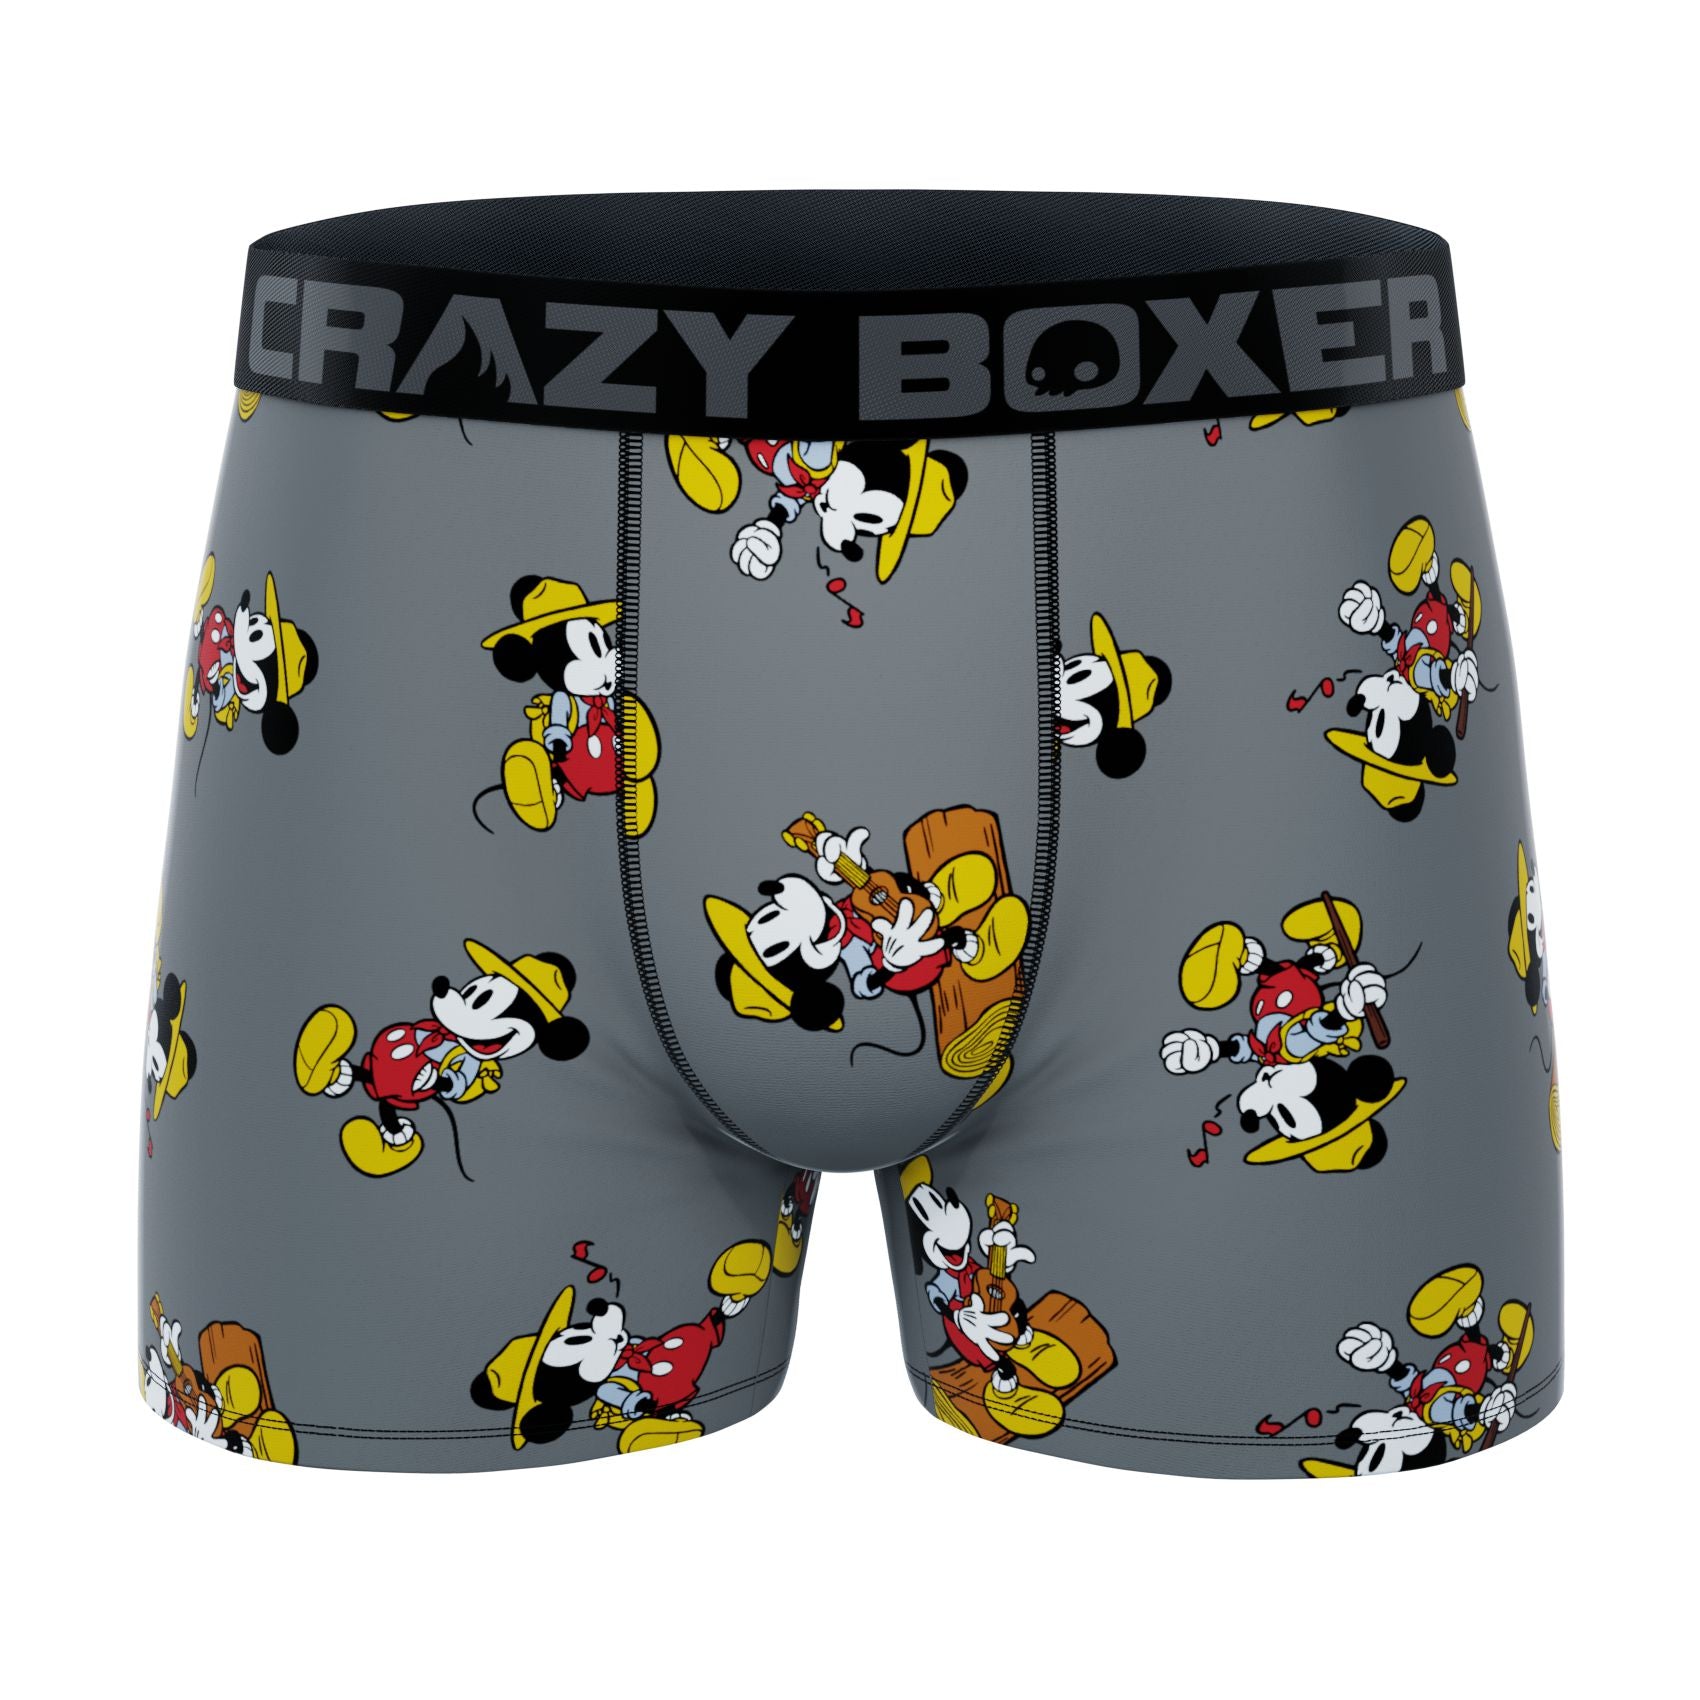 Wholesale Mickey Mouse 3 pack briefs for boys- Blue / Grey SKU: HU305